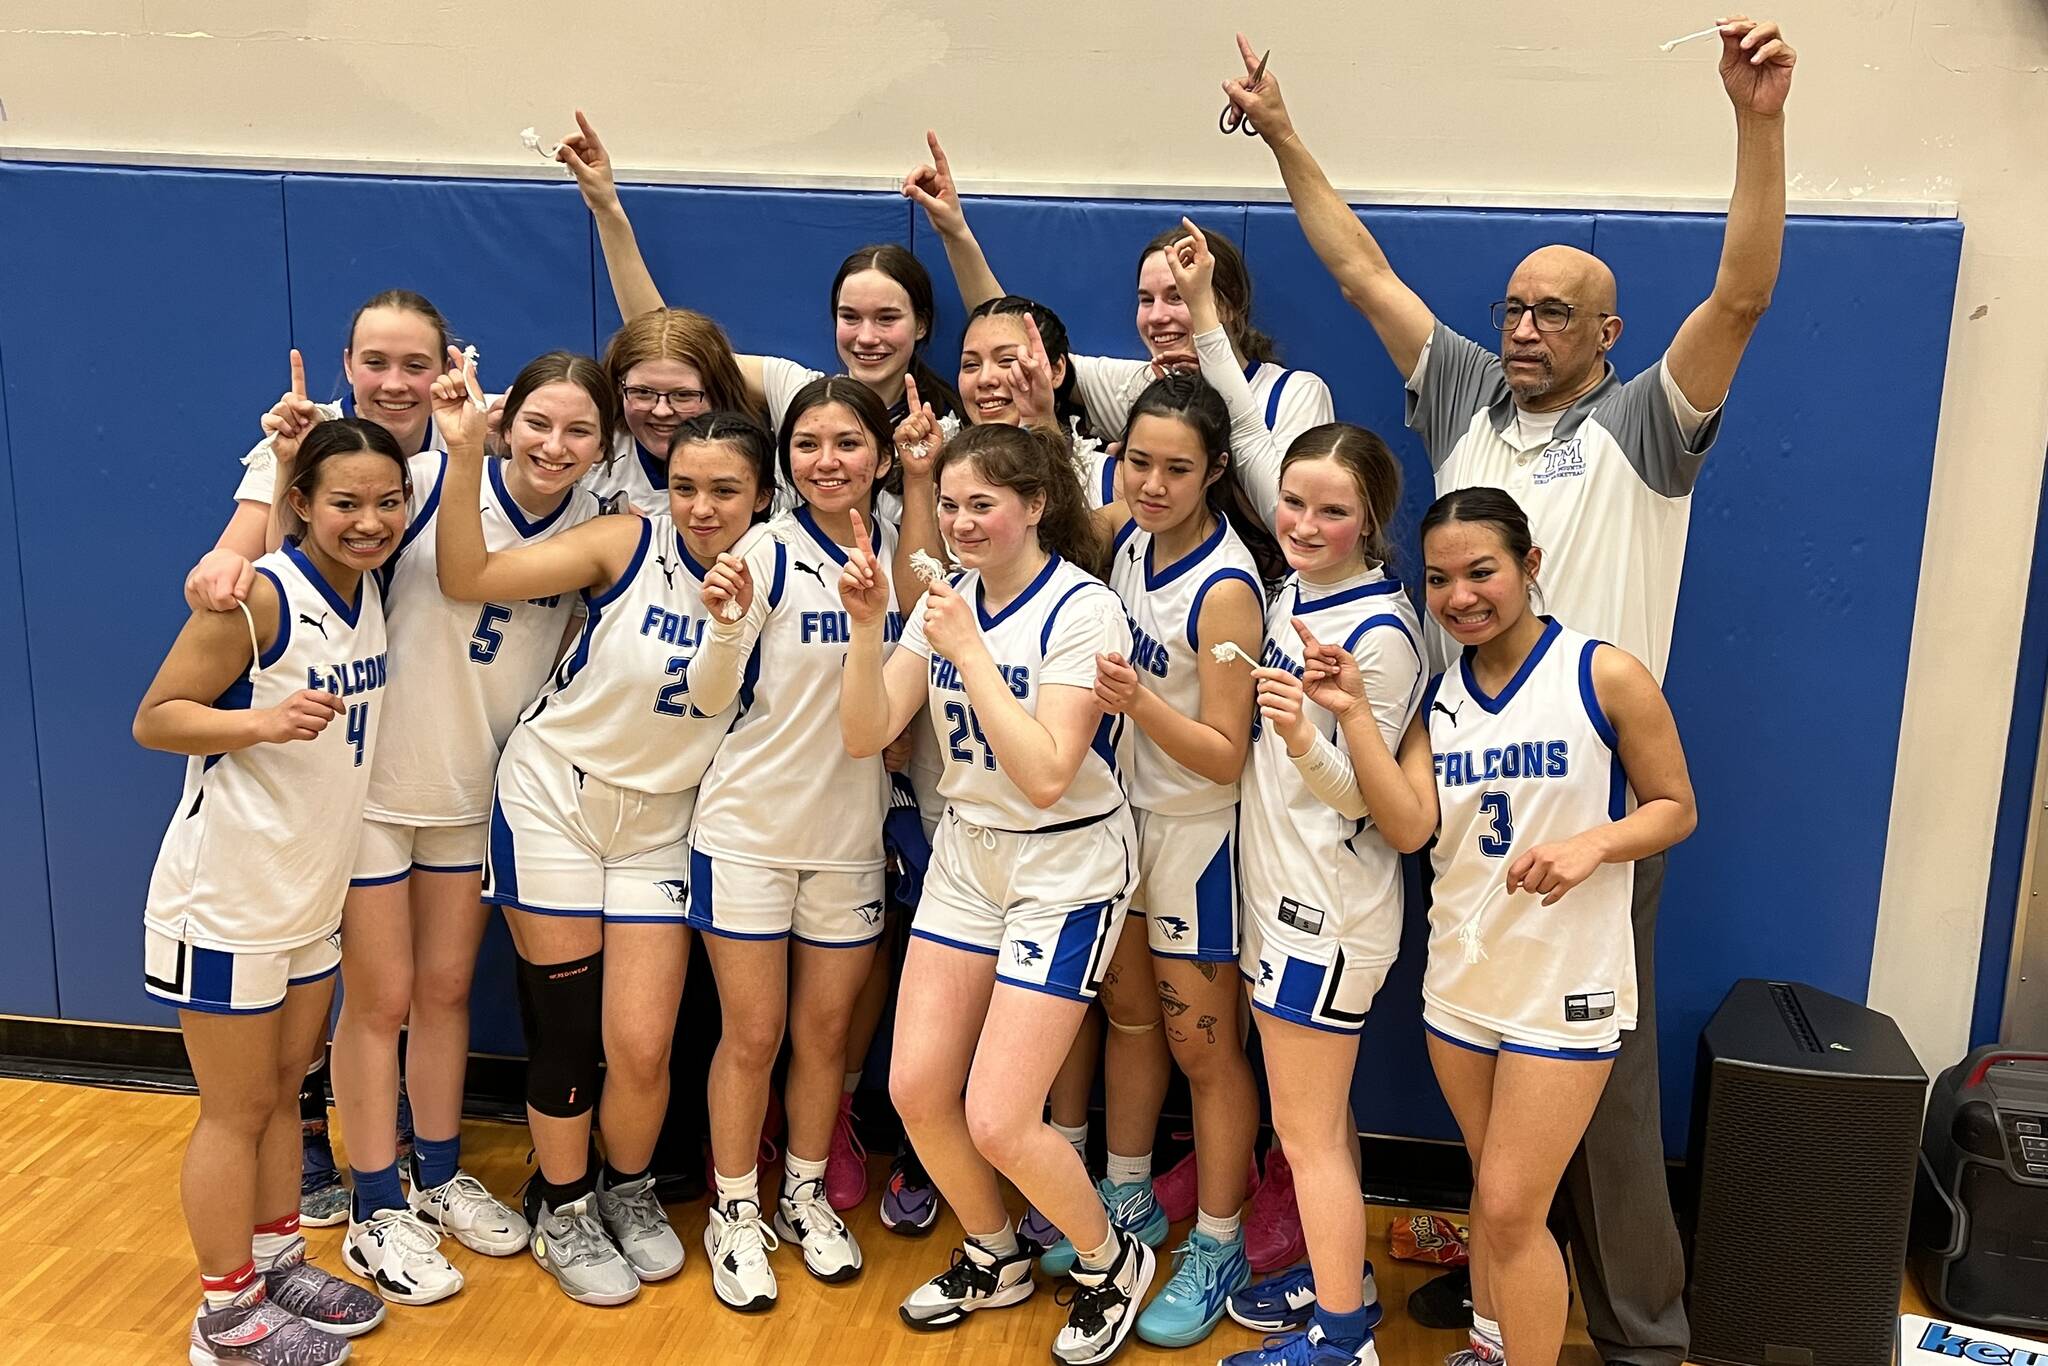 TMHS coach Andy lee poses with the Thunder Mountain Lady Falcons, the new region champions on Friday, after defeating JDHS in the final match up of the tournament. (Jonson Kuhn / Juneau Empire)